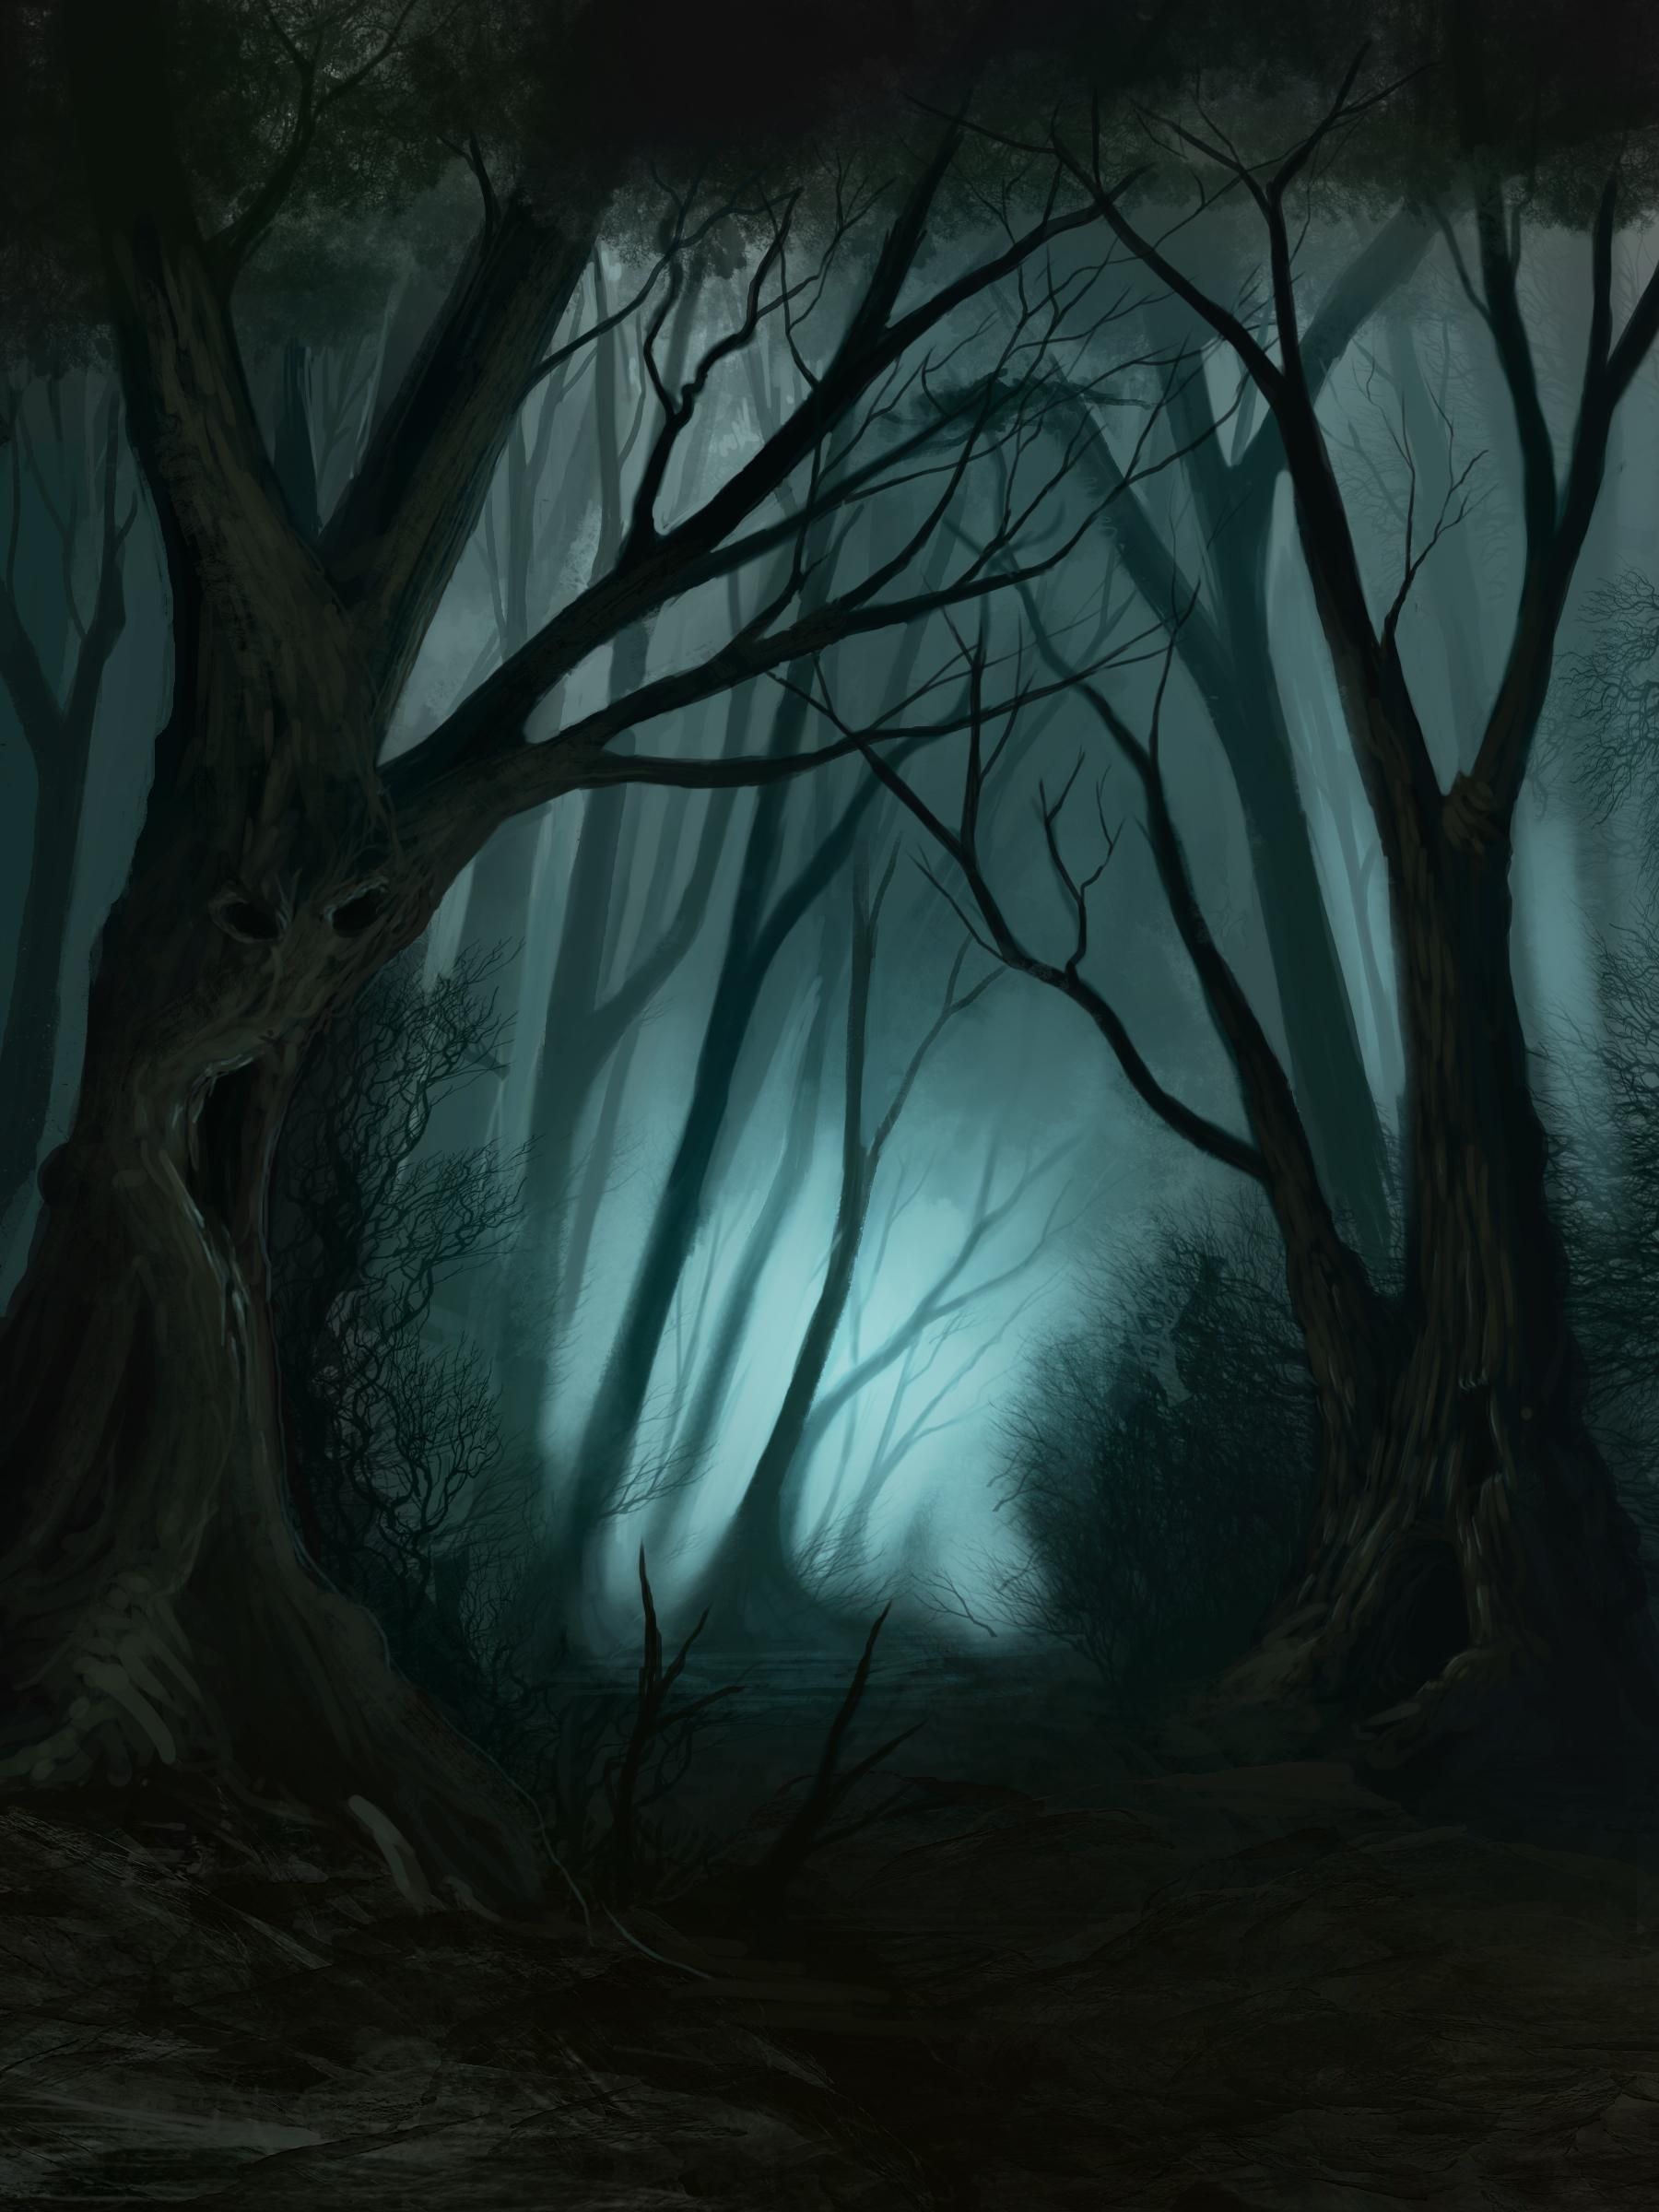 Harilal Haridasan On Creepy Forest In Drawing